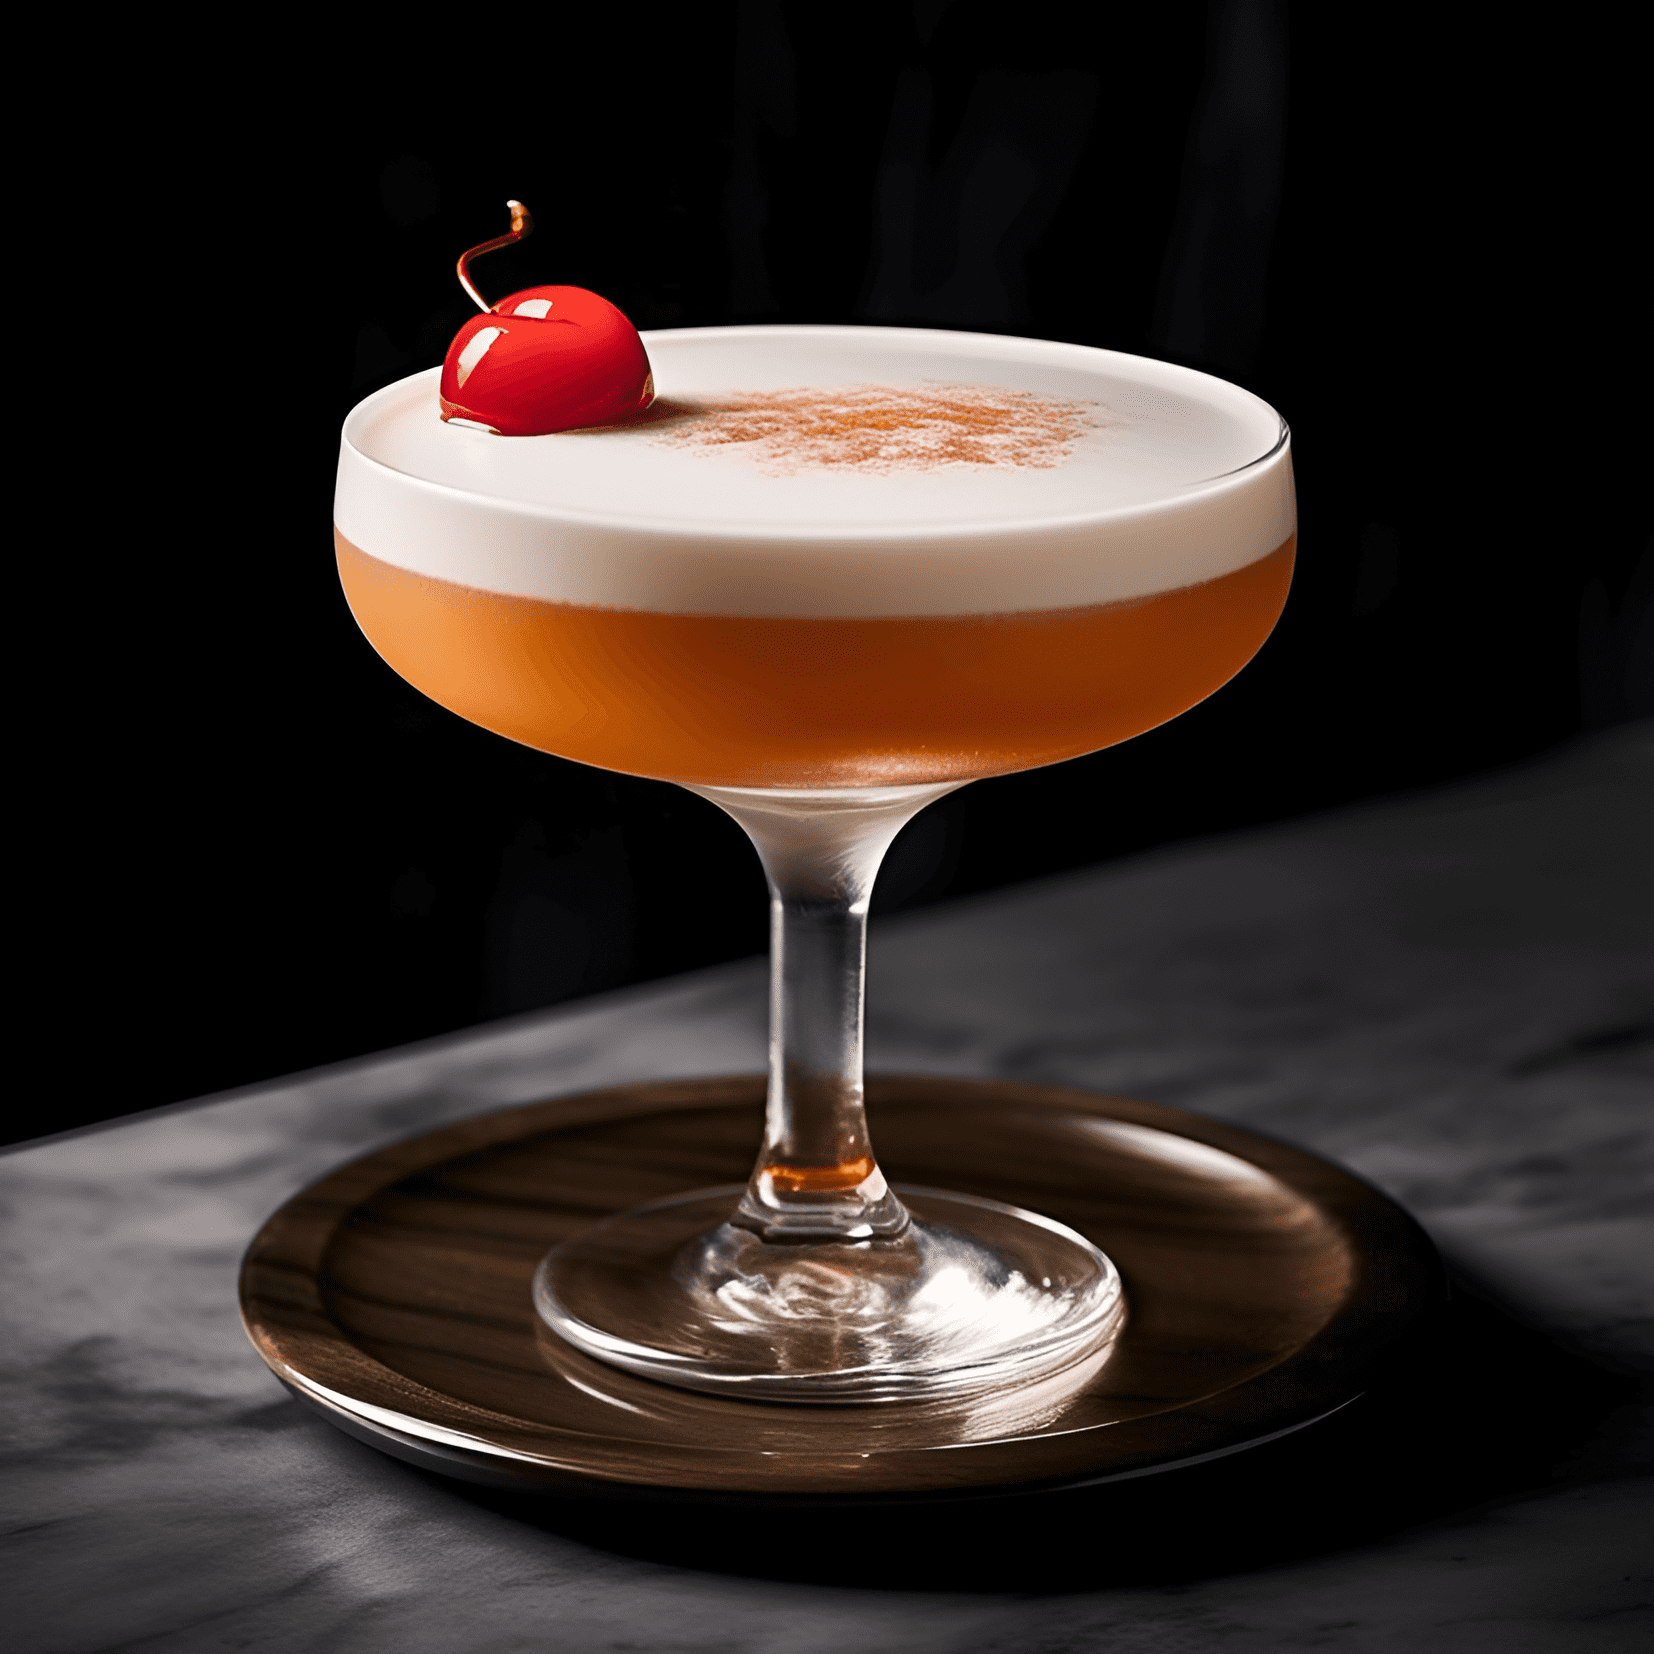 Ragged Company Cocktail Recipe - The Ragged Company cocktail is a harmonious blend of sweet, sour, and bitter flavors, with a touch of smokiness. The drink is both refreshing and invigorating, with a smooth, velvety texture and a lingering, complex finish.